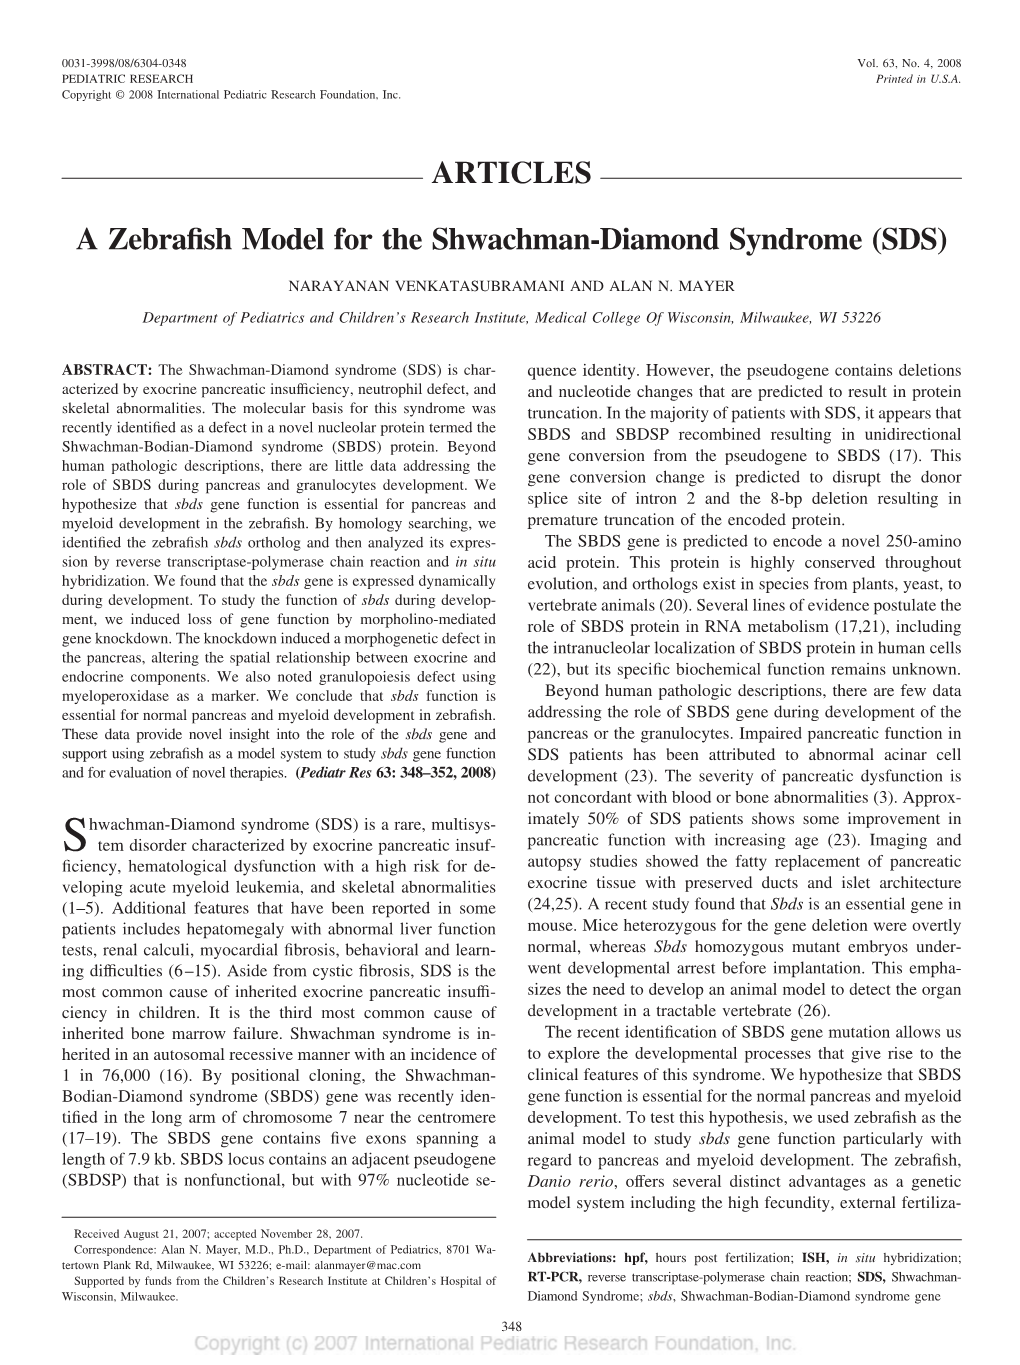 A Zebrafish Model for the Shwachman-Diamond Syndrome (SDS)